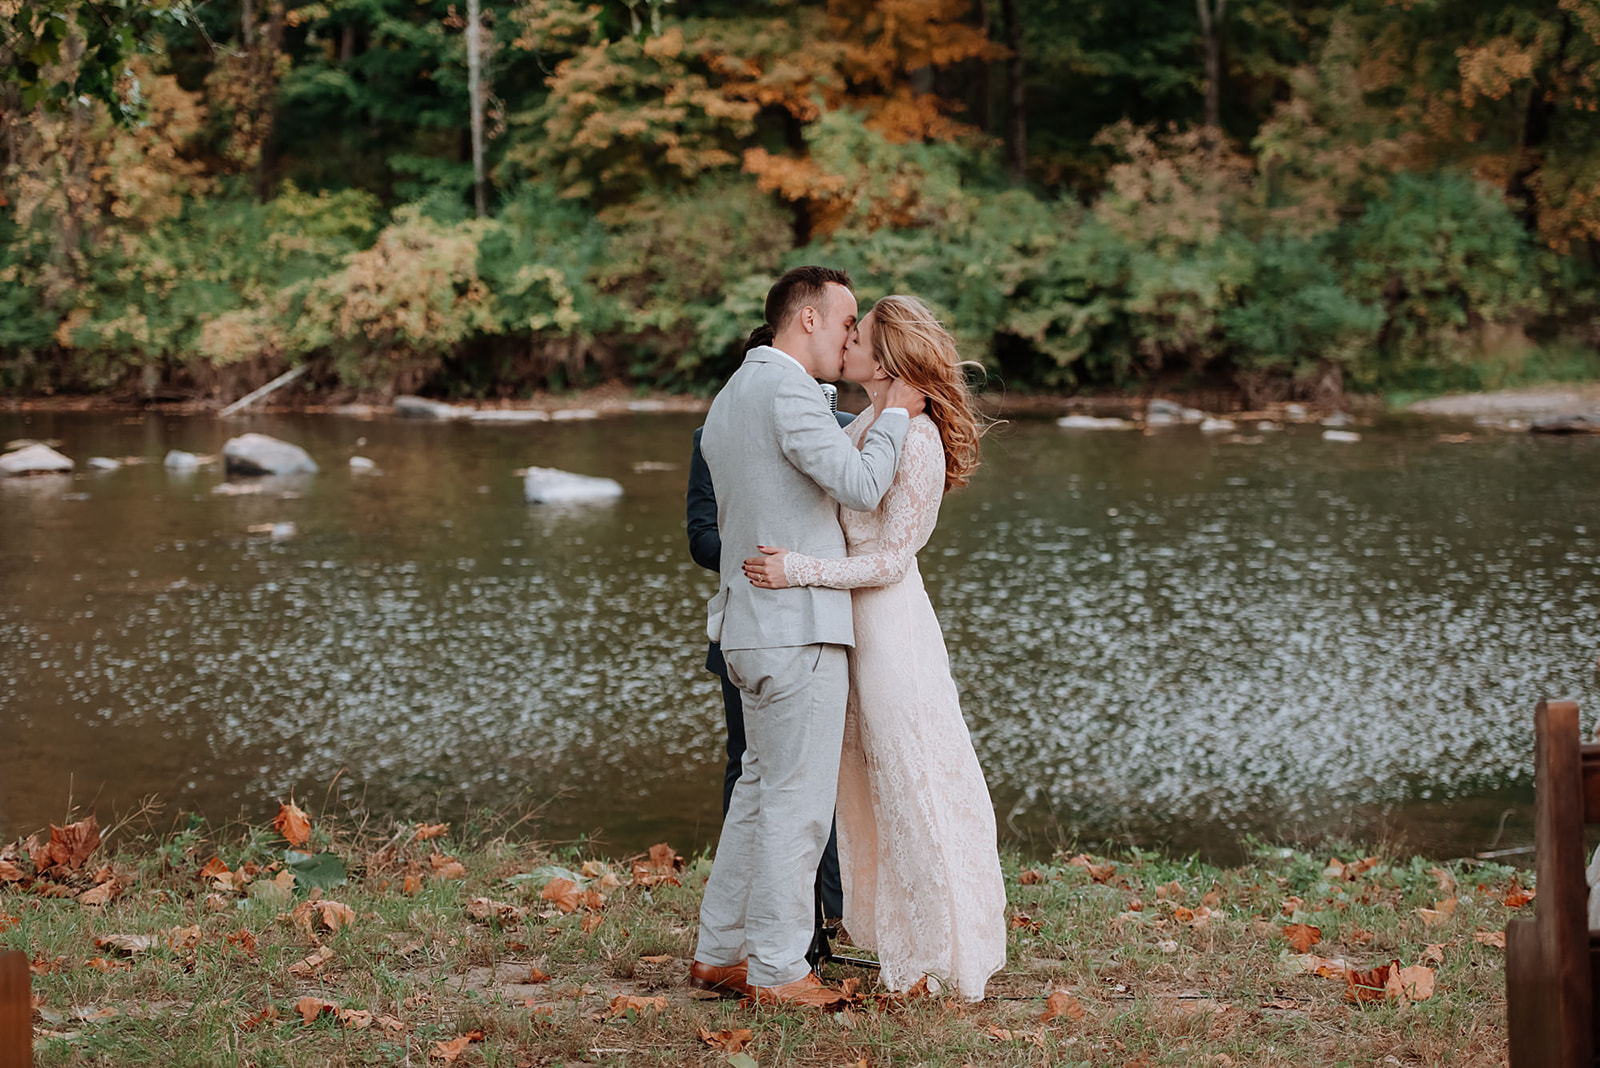 After their river front wedding ceremony, this hipster couple shares their first kiss.